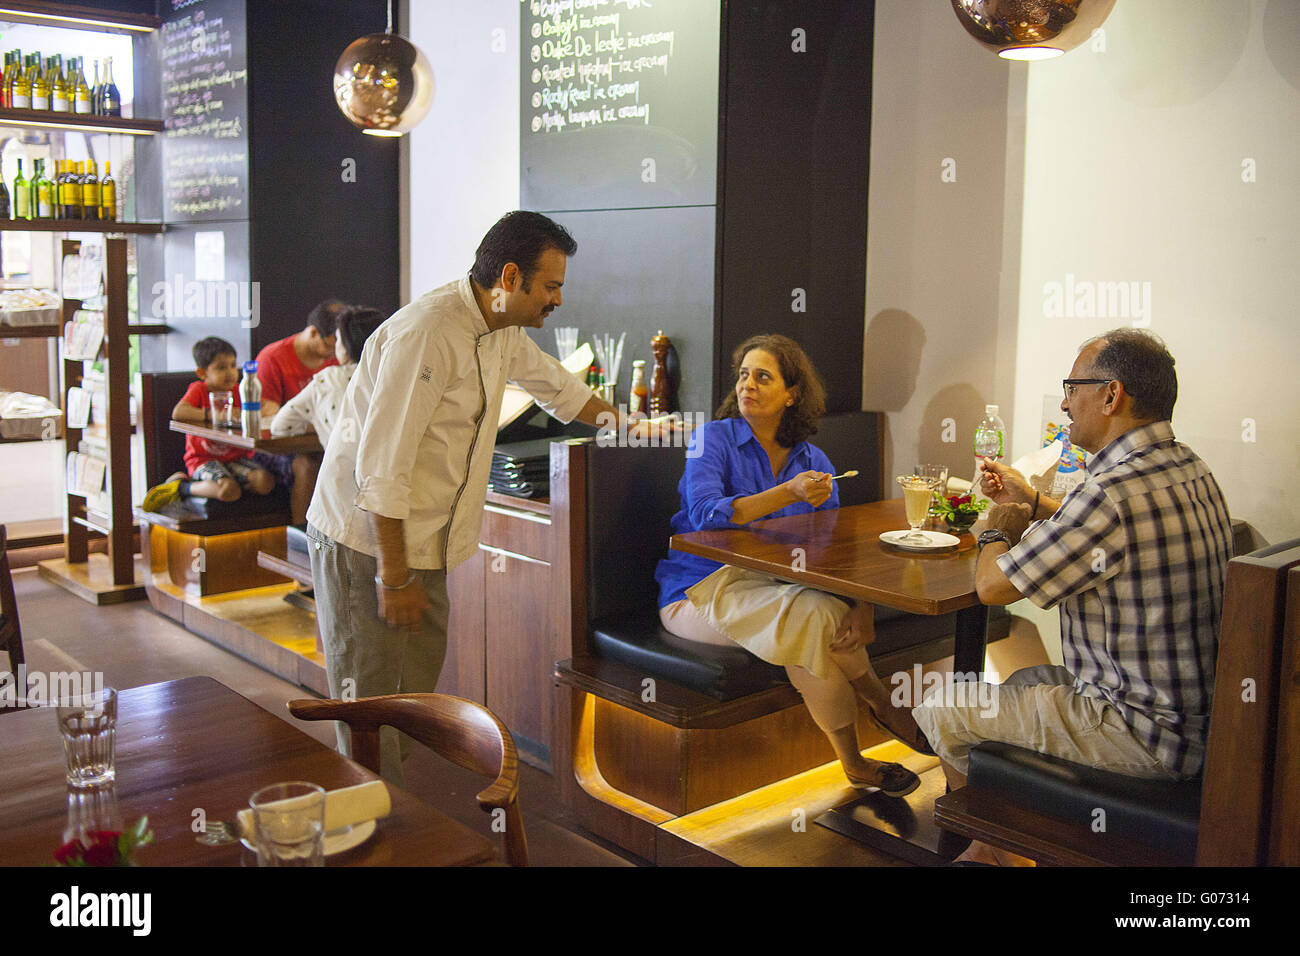 April 19, 2016 - Mumbai, Maharashtra, India - 19 April 2016 - Mumbai - INDIA..Chef Paramjeet Singh talks with Patrons at the Indigo Restaurant at Inorbit Mall in Mumbai..The restaurant scene in India is rapidly developing. New restaurants are constantly opening as businesses try to capitalise on the countryÃ•s rising wealth and a burgeoning young and better-travelled population. India has long been dominated by unbranded eateries, mainly serving North Indian and South Indian food. But there is an ever-growing appetite  for the big-name chains and both international and home-grown cafes and hip Stock Photo